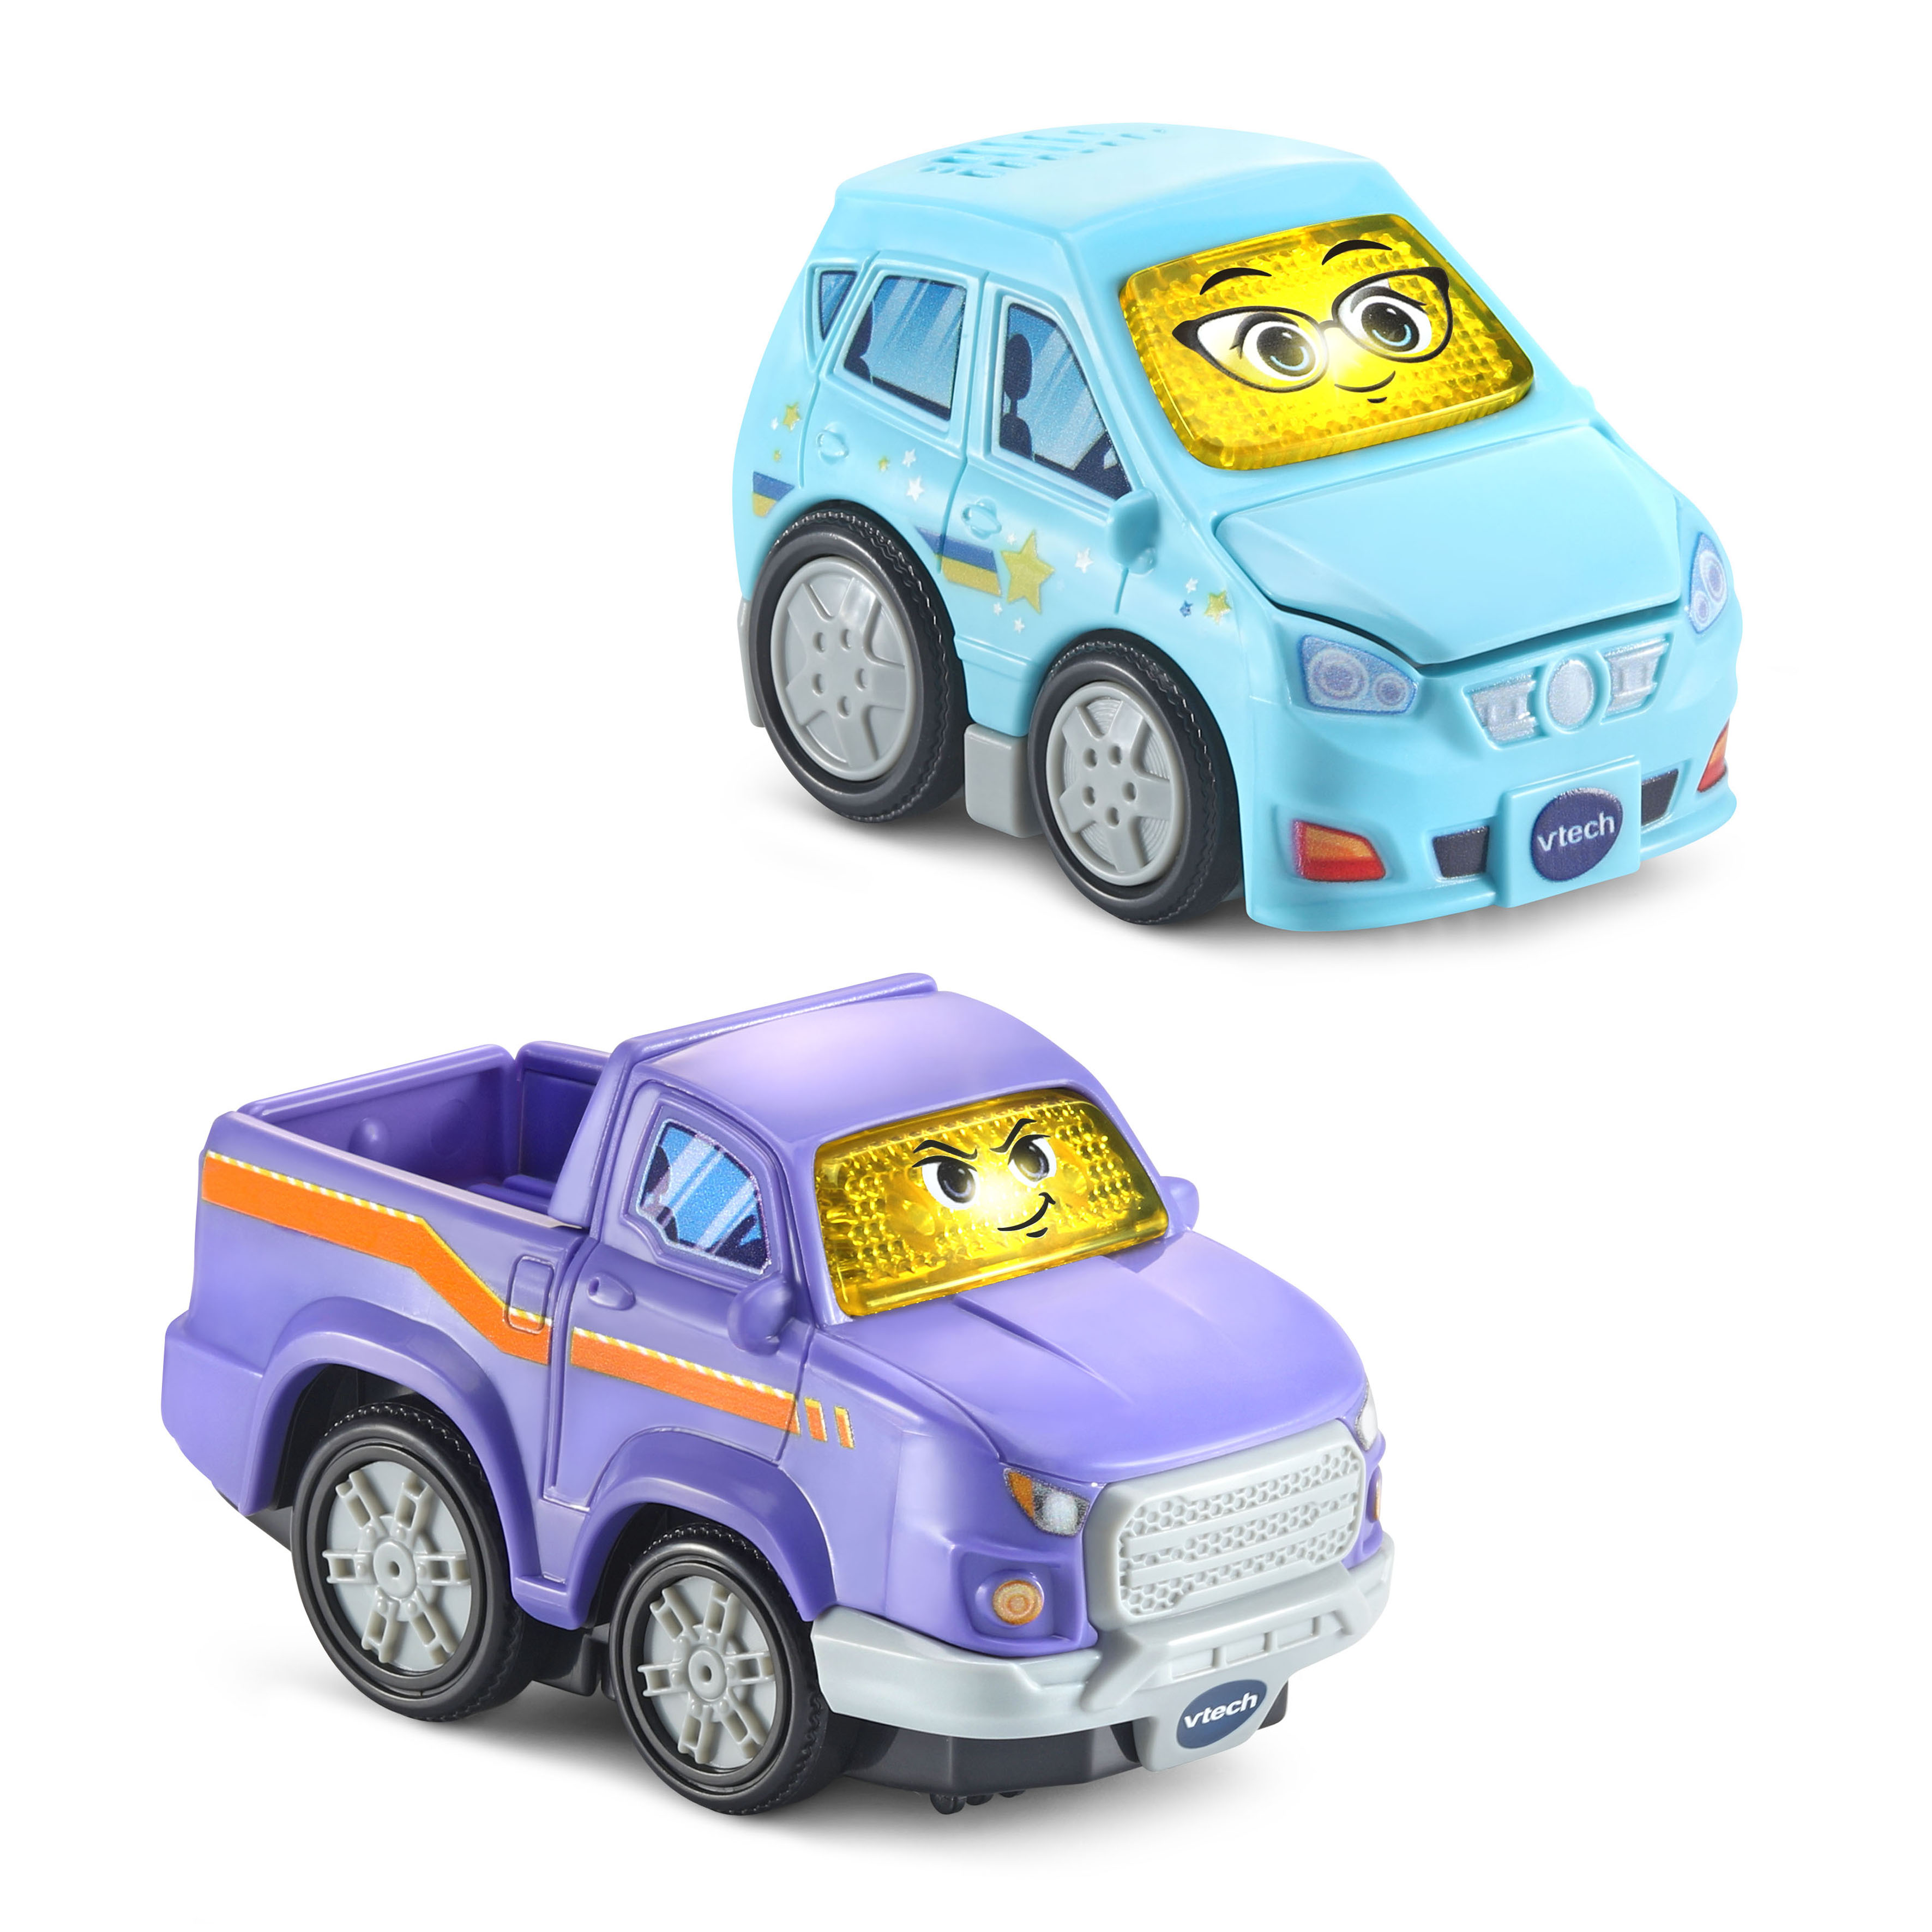 VTech® Go! Go! Smart Wheels® Roadway Heroes 3-Pack Kids' First Toy